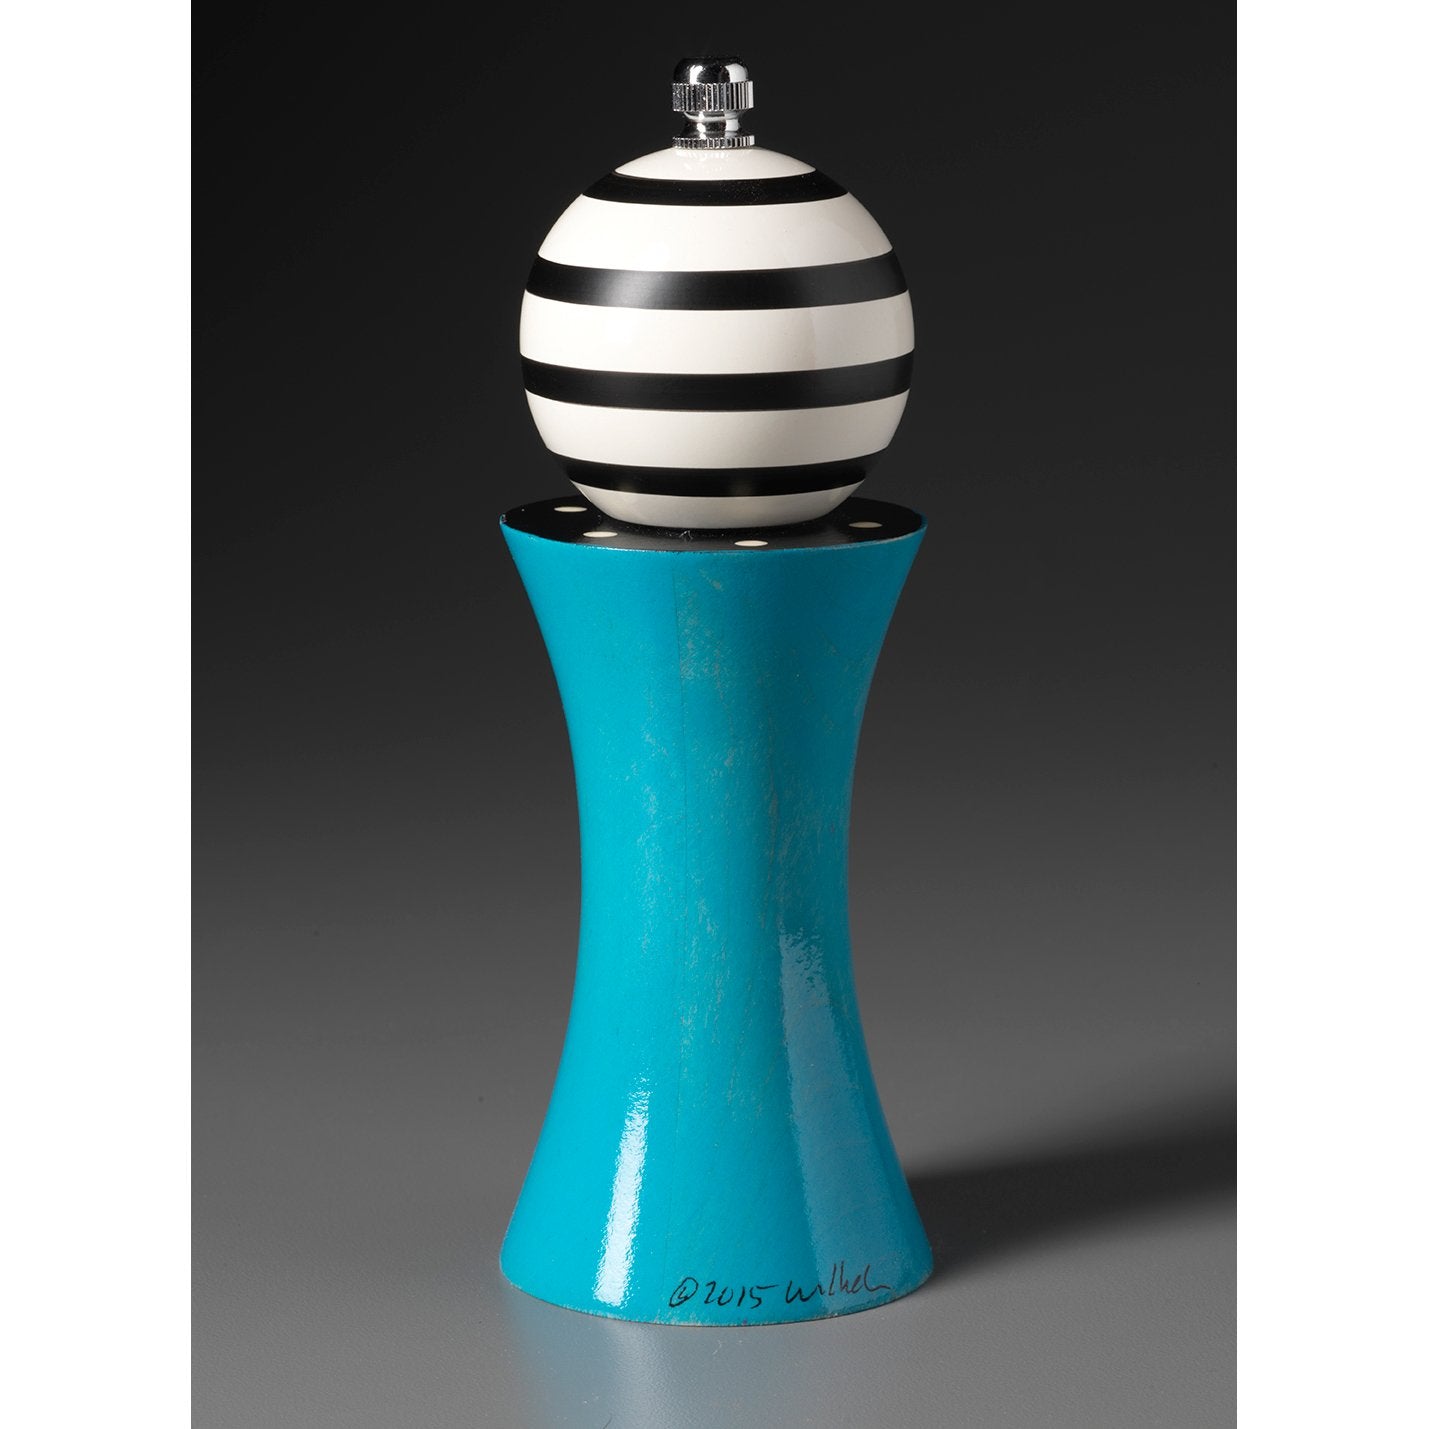 https://www.sweetheartgallery.com/cdn/shop/products/Wood-Salt-or-Pepper-Mill-Grinder-Alpha-in-Turquoise-Black-and-White-by-Robert-Wilhelm-of-Raw-Design-Artistic-Artisan-Designer-Handmade-Wood-Salt-And-Pepper-Mills-Grinders-and-Shakers.jpg?v=1590419448